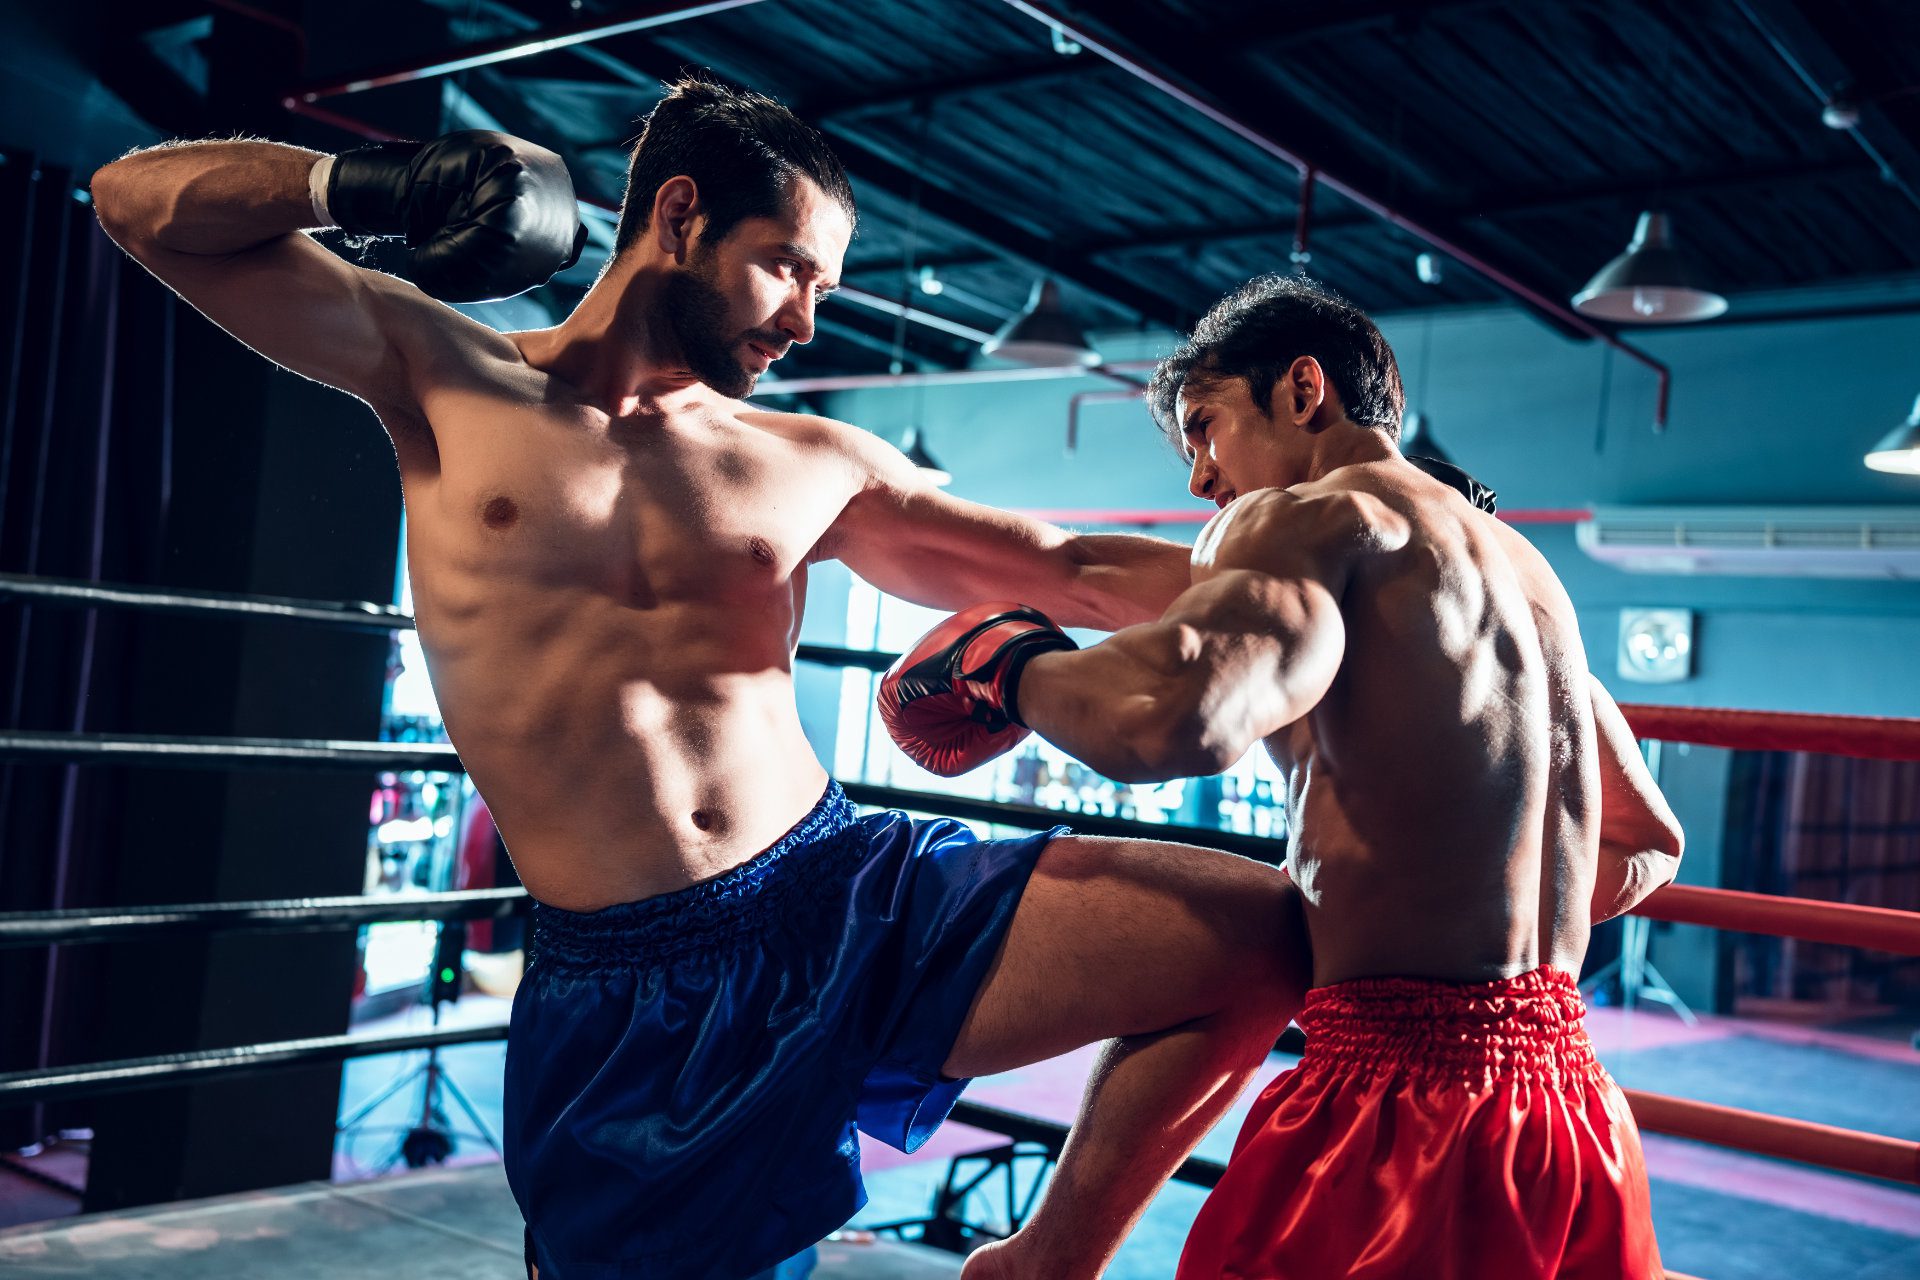 Thai boxing at Bodystyle